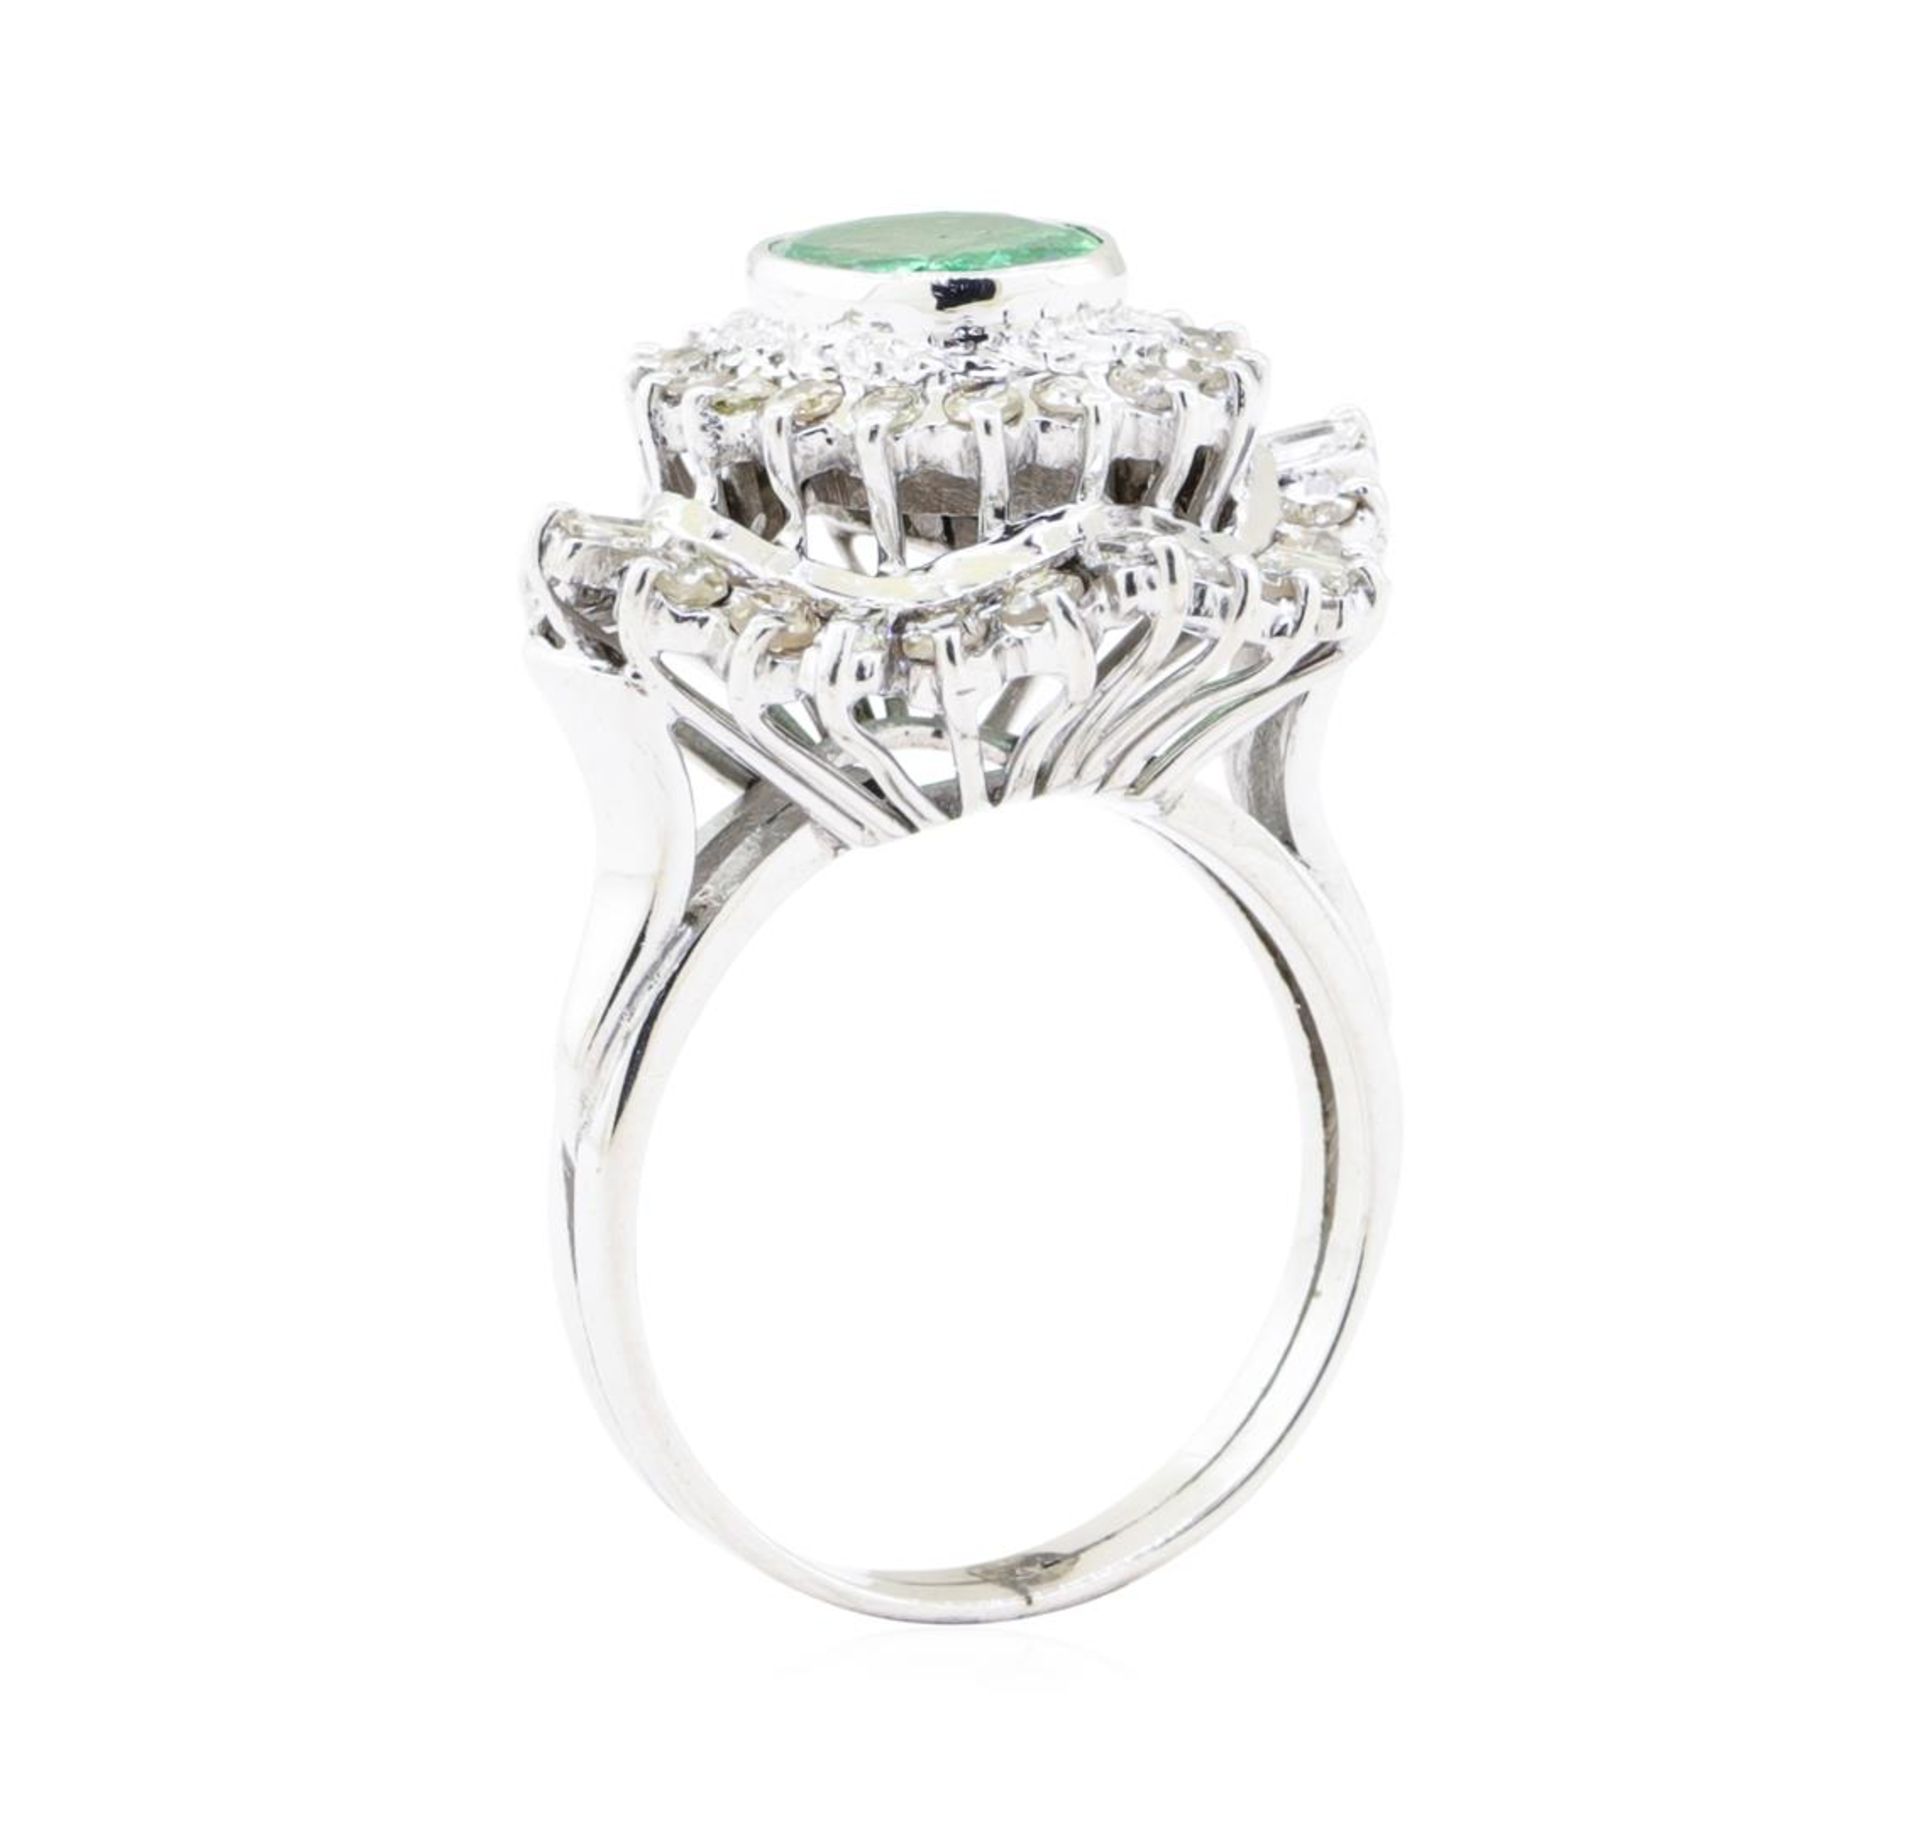 2.84 ctw Emerald And Diamond Double Halo Ring - 14KT White Gold - Image 4 of 5